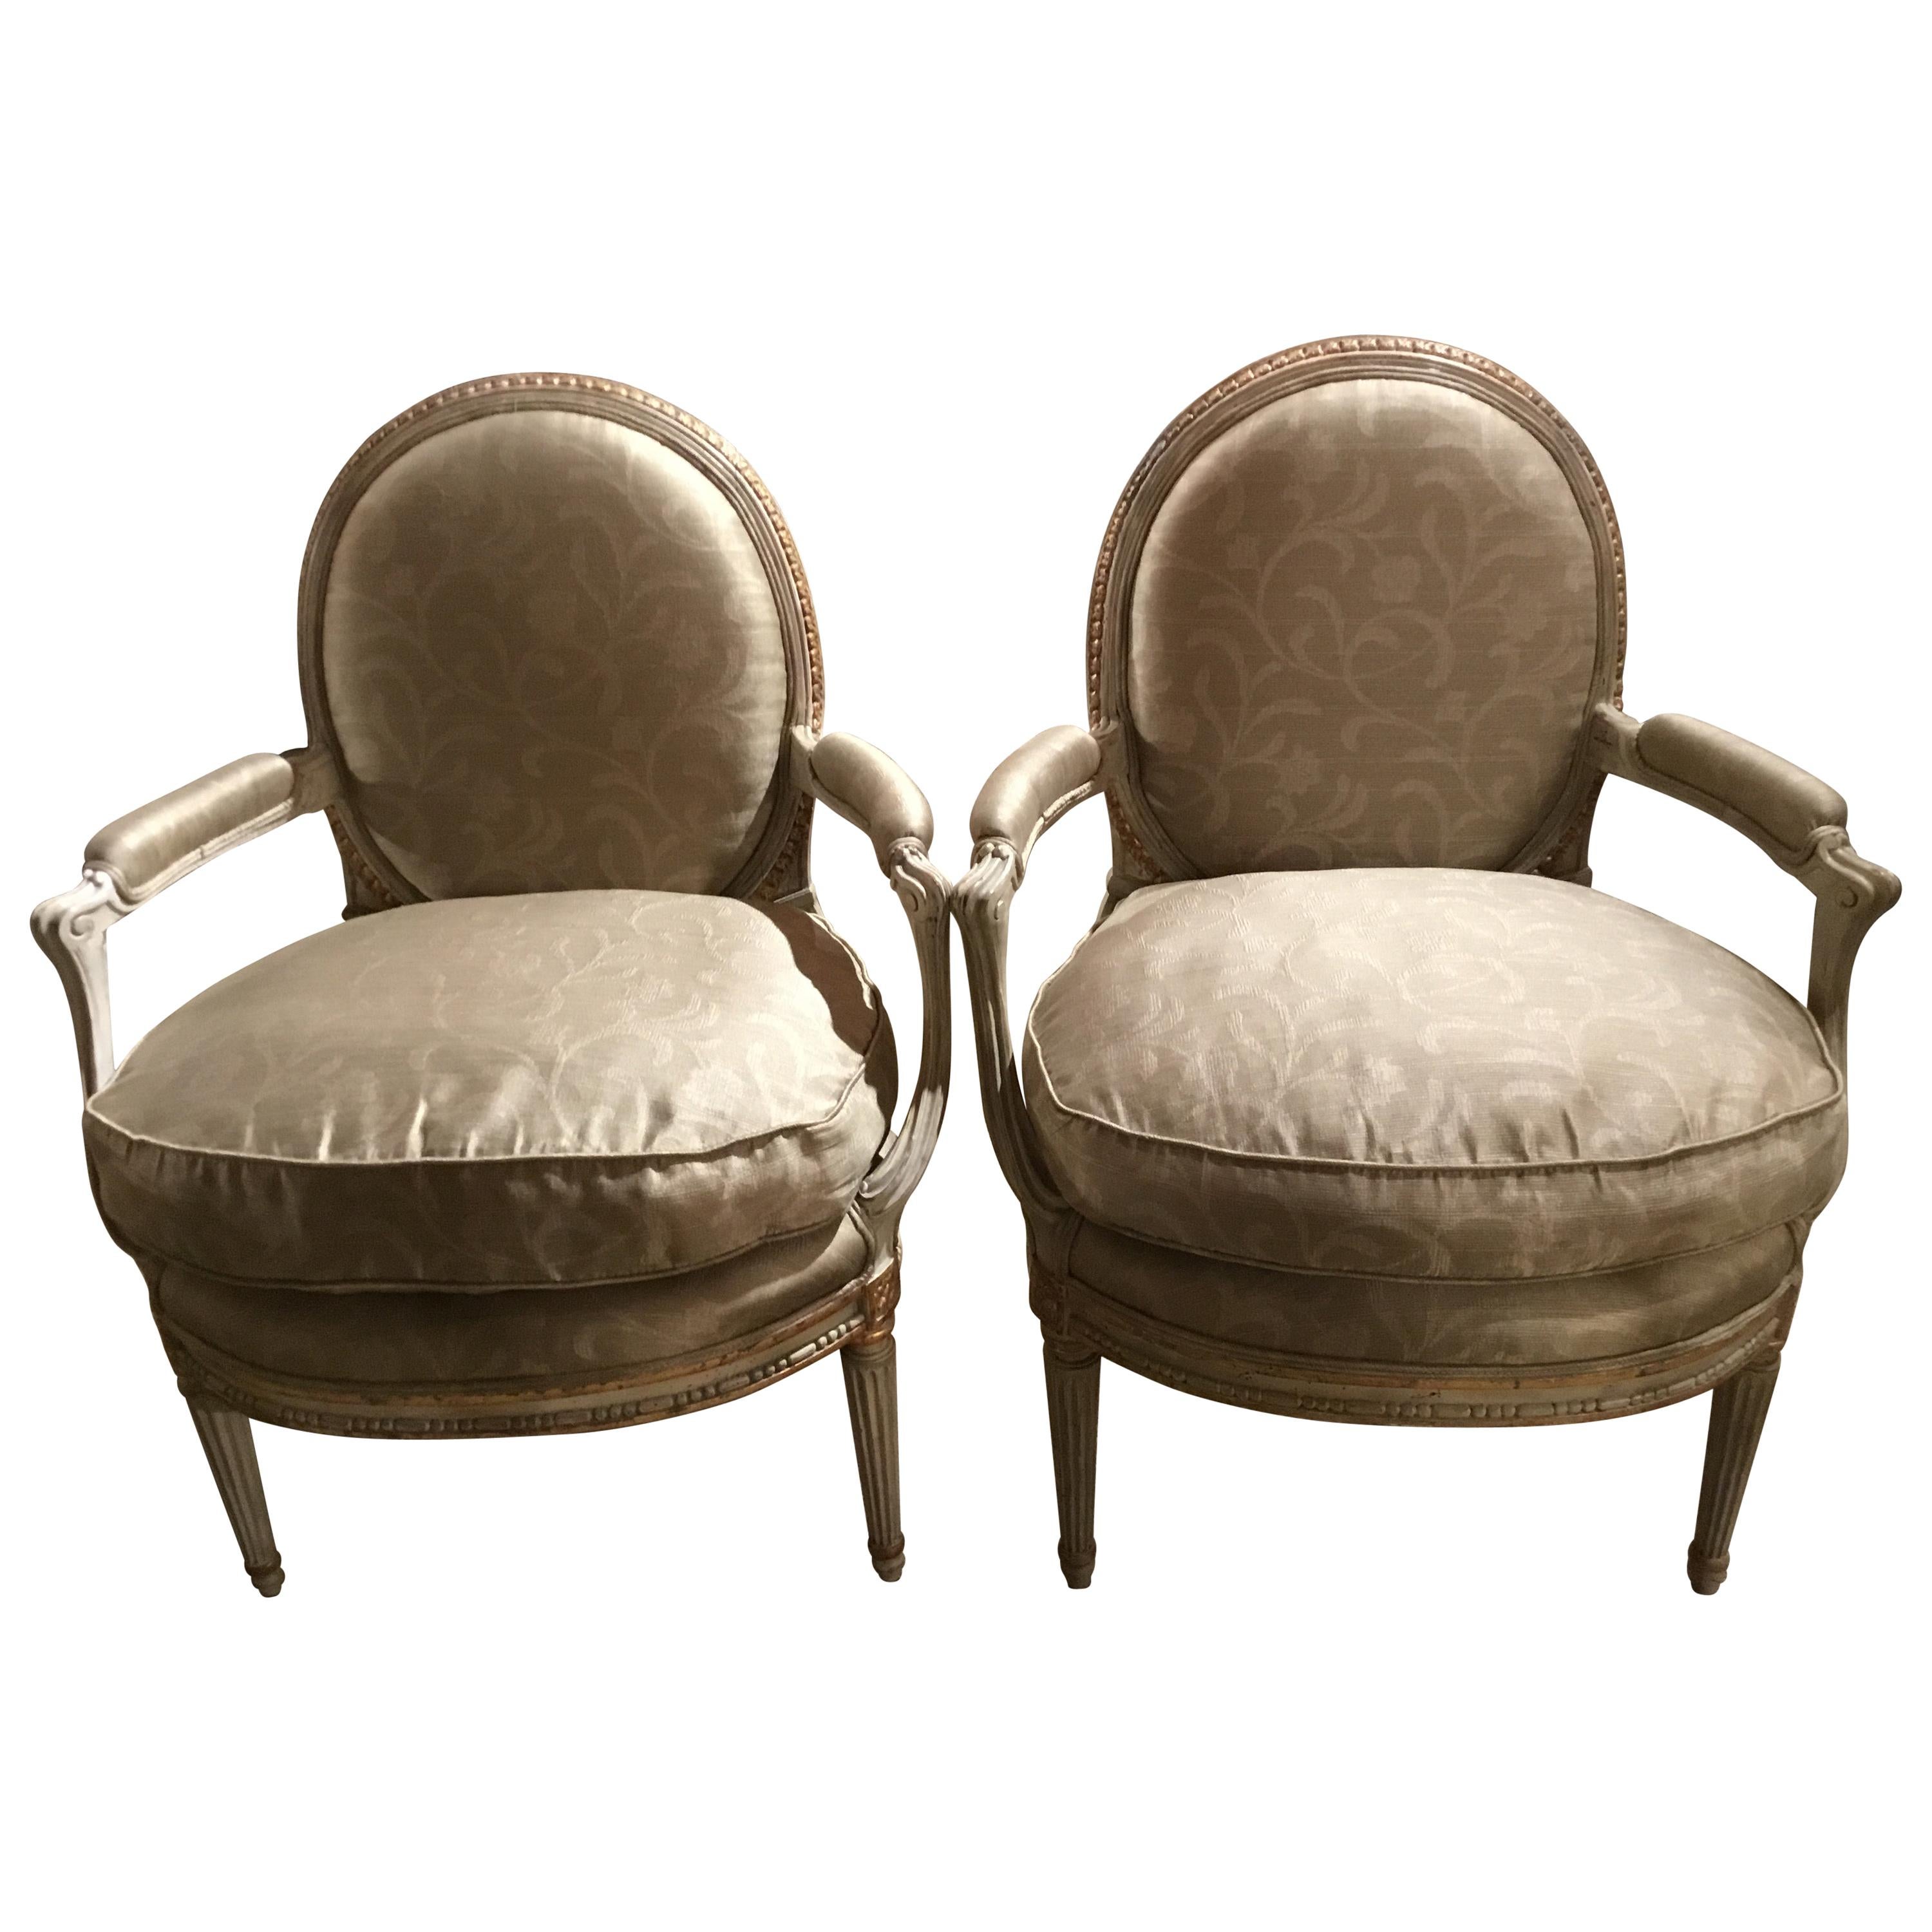 Pair of French Louis XVI Style Parcel Paint and Parcel-Gilt Chairs/Fauteuils For Sale